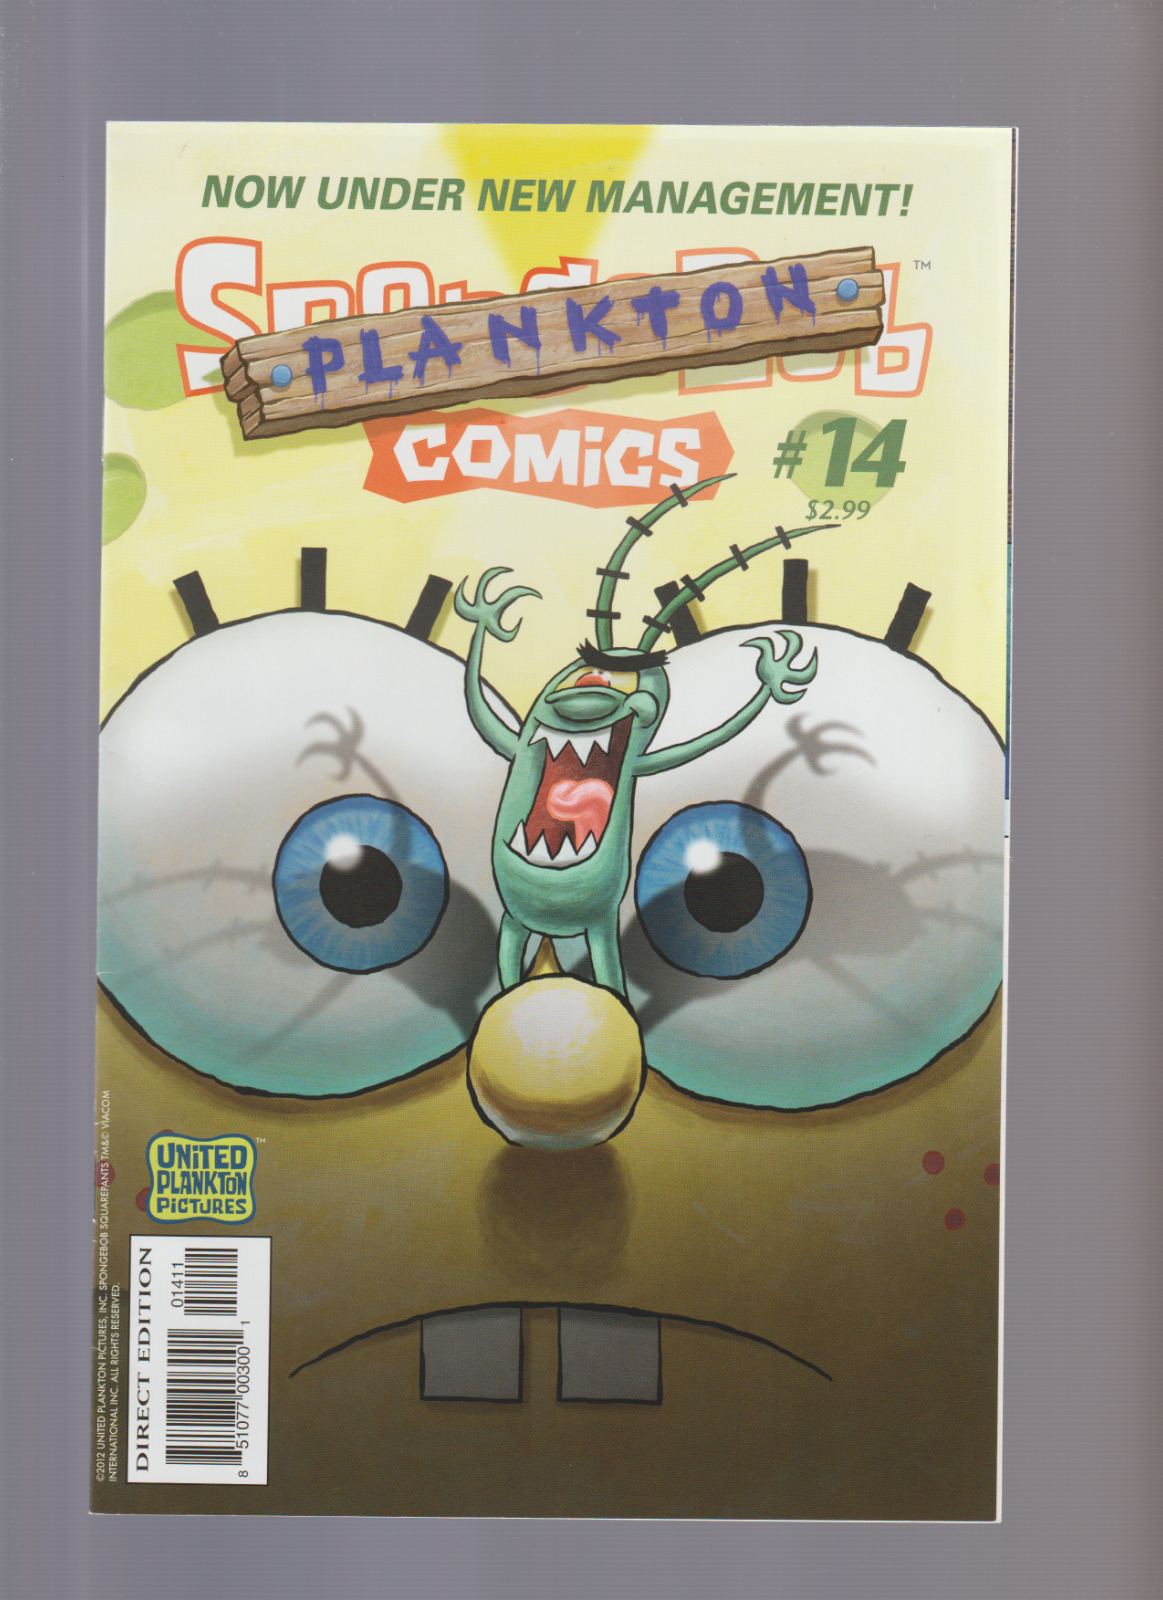 Spongebob Comics #14 (United Plankton Pictures) W/ POSTER PAINTING BY CREATOR